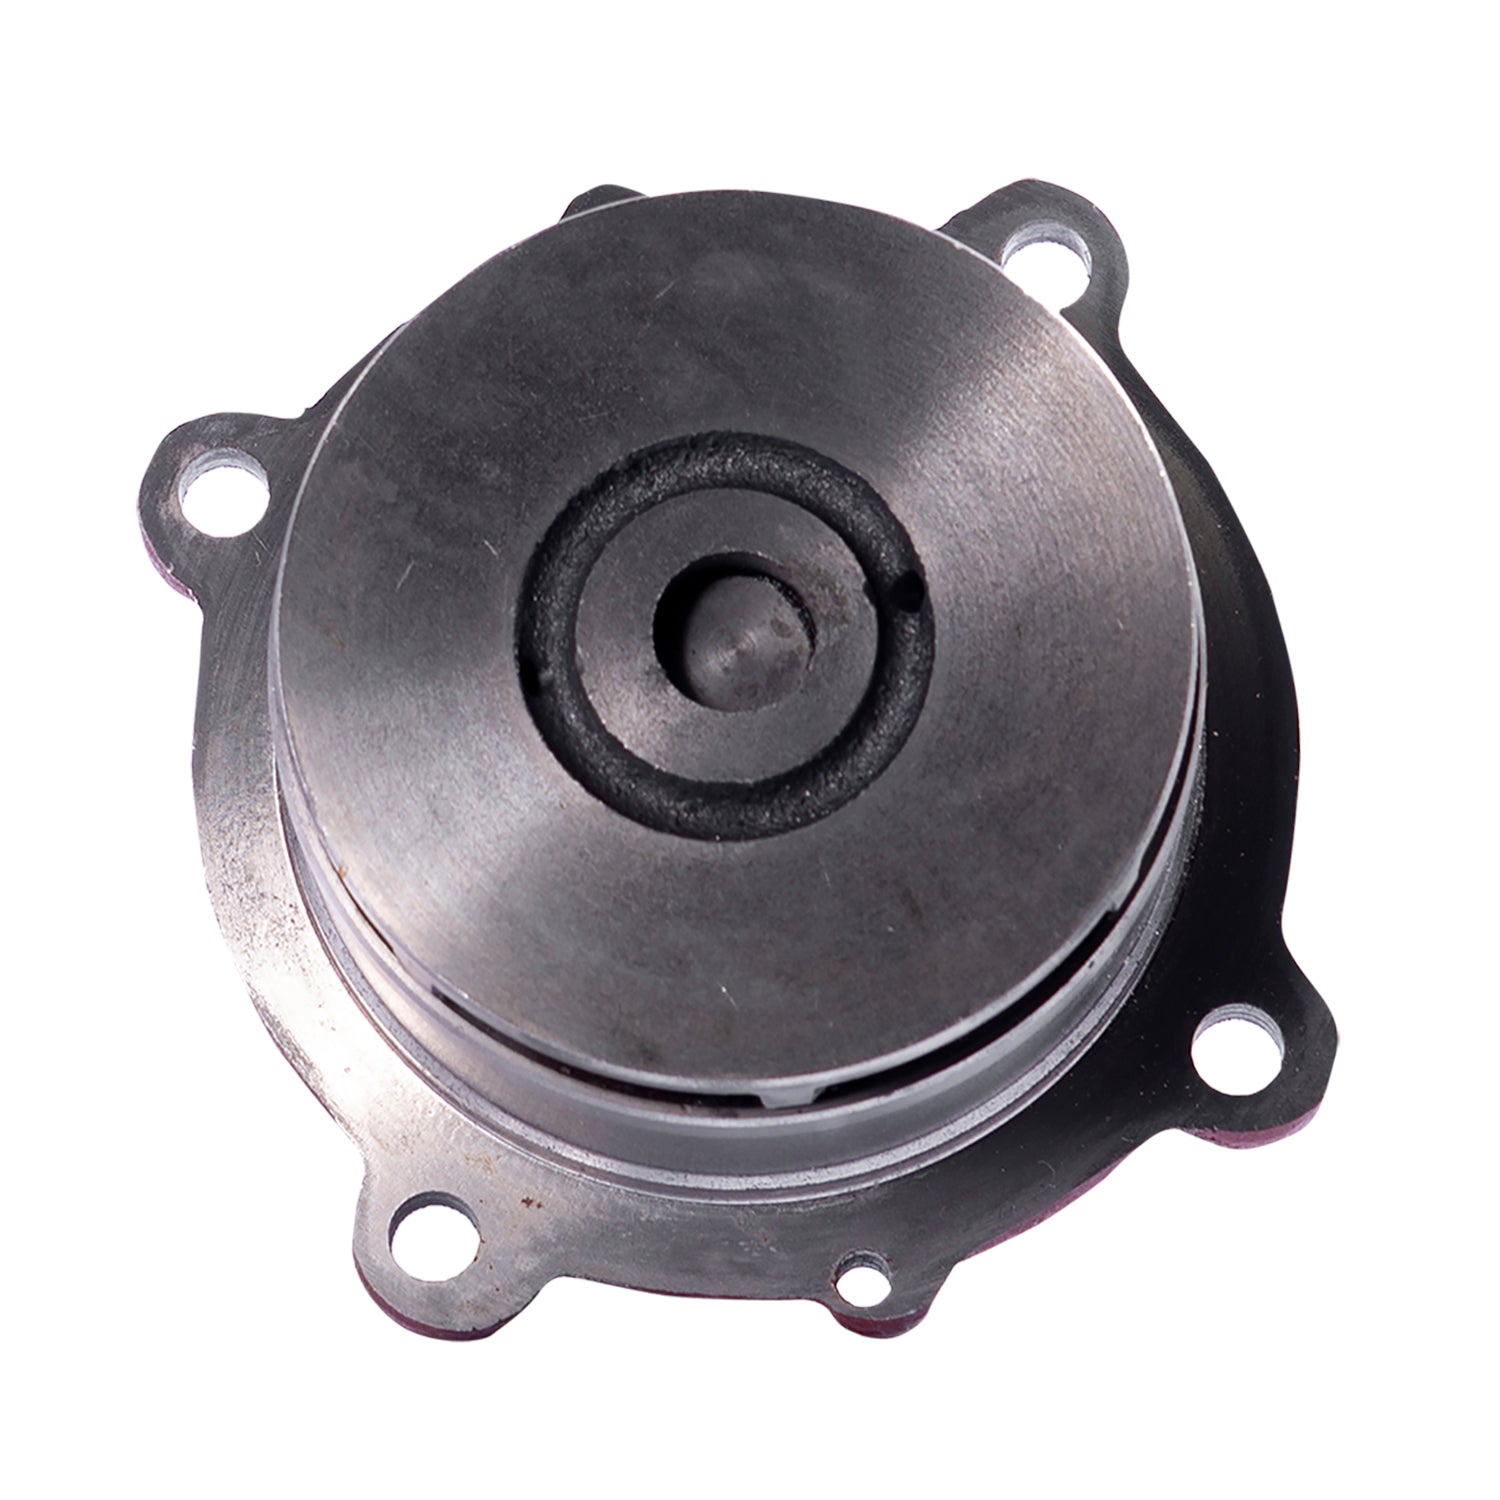 Water Pump Cooling For Deutz 02937441 TCD 2013 TCD 2012 2012 2013 1013